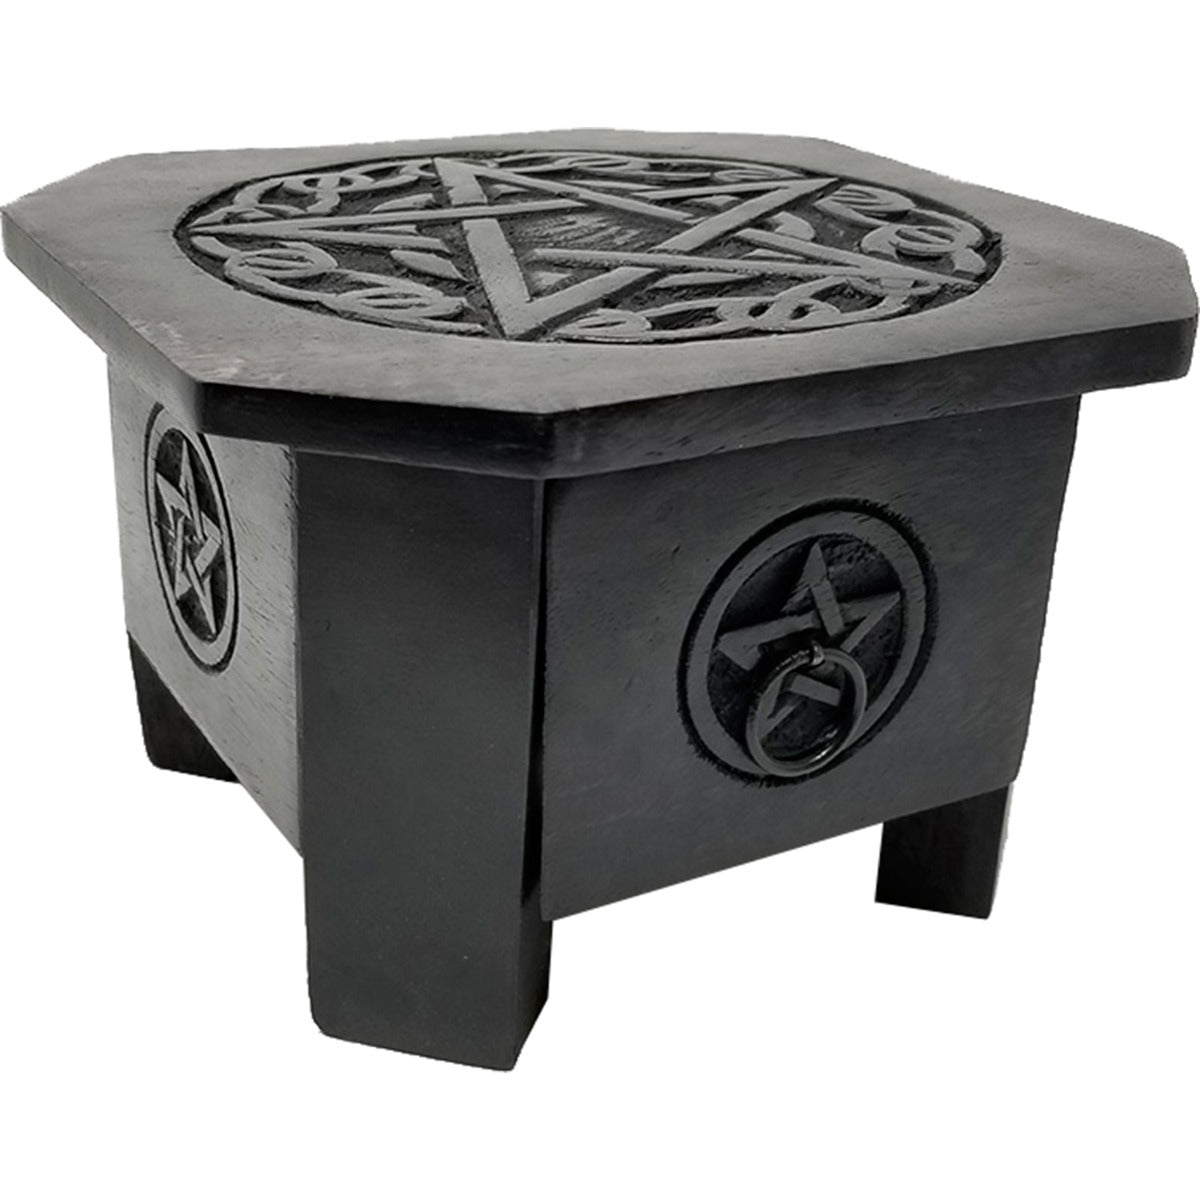 Pentacle Altar Table with Drawer - 13 Moons